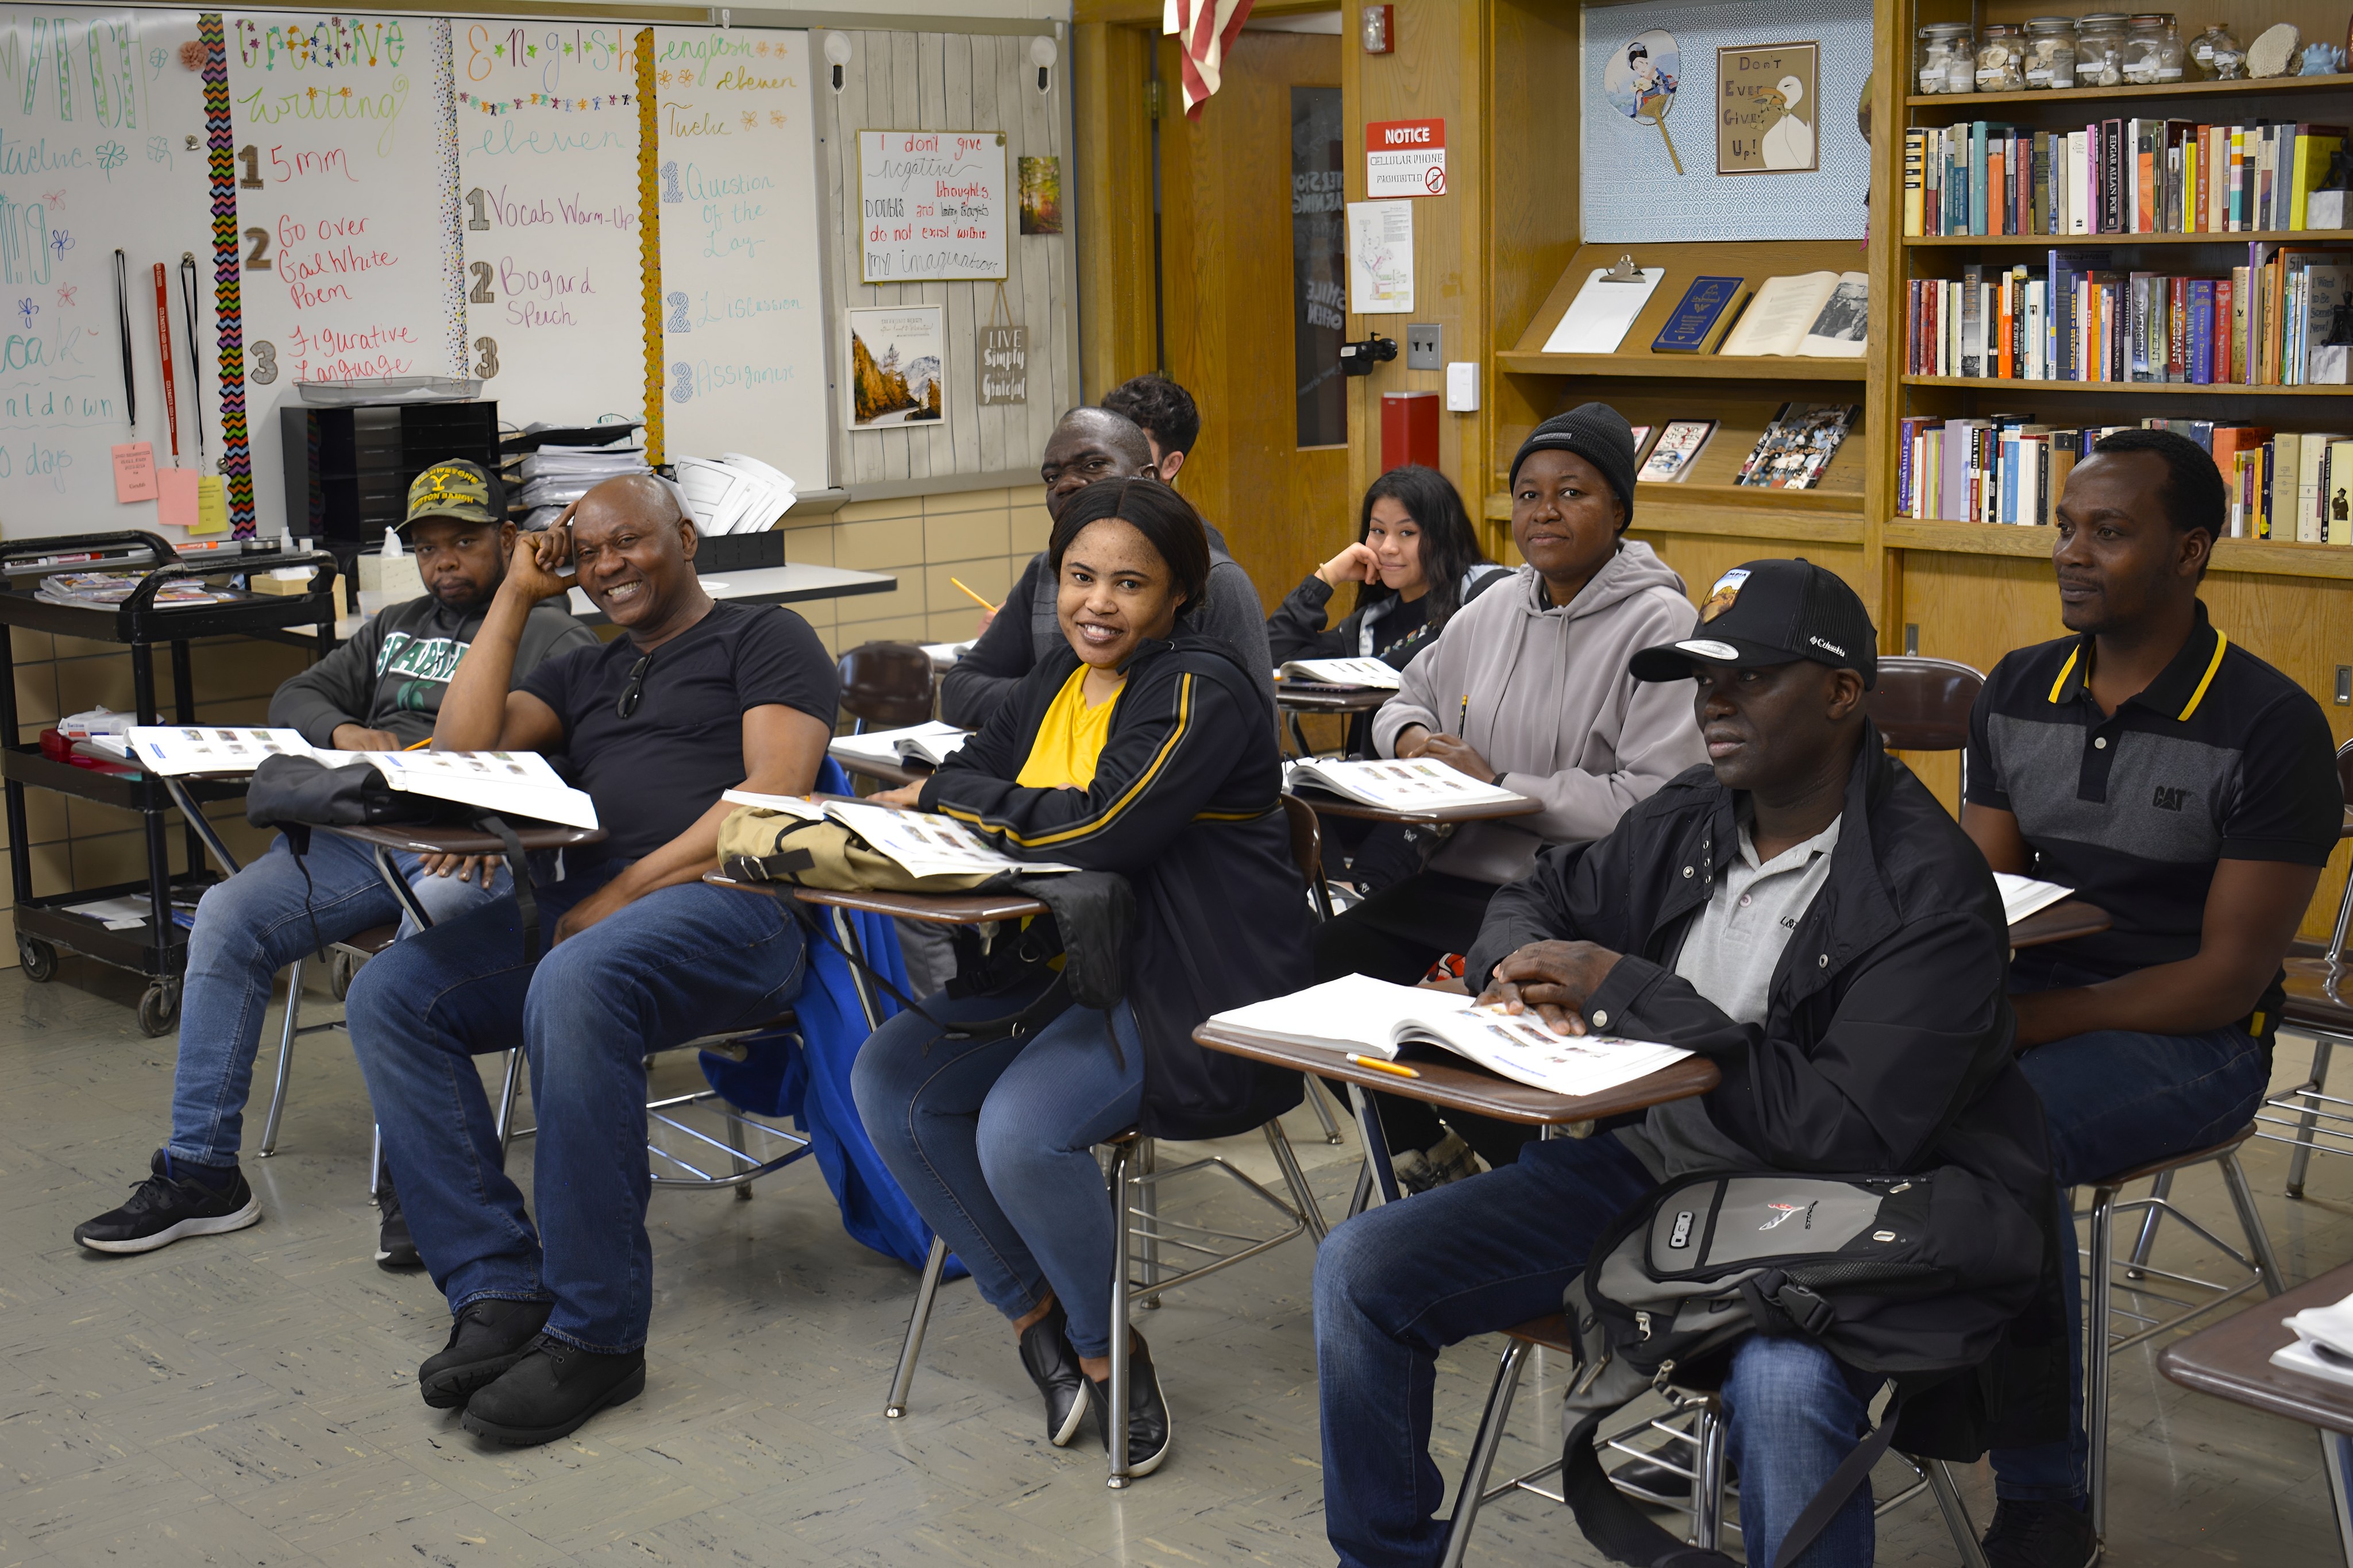 Adult education classroom with students